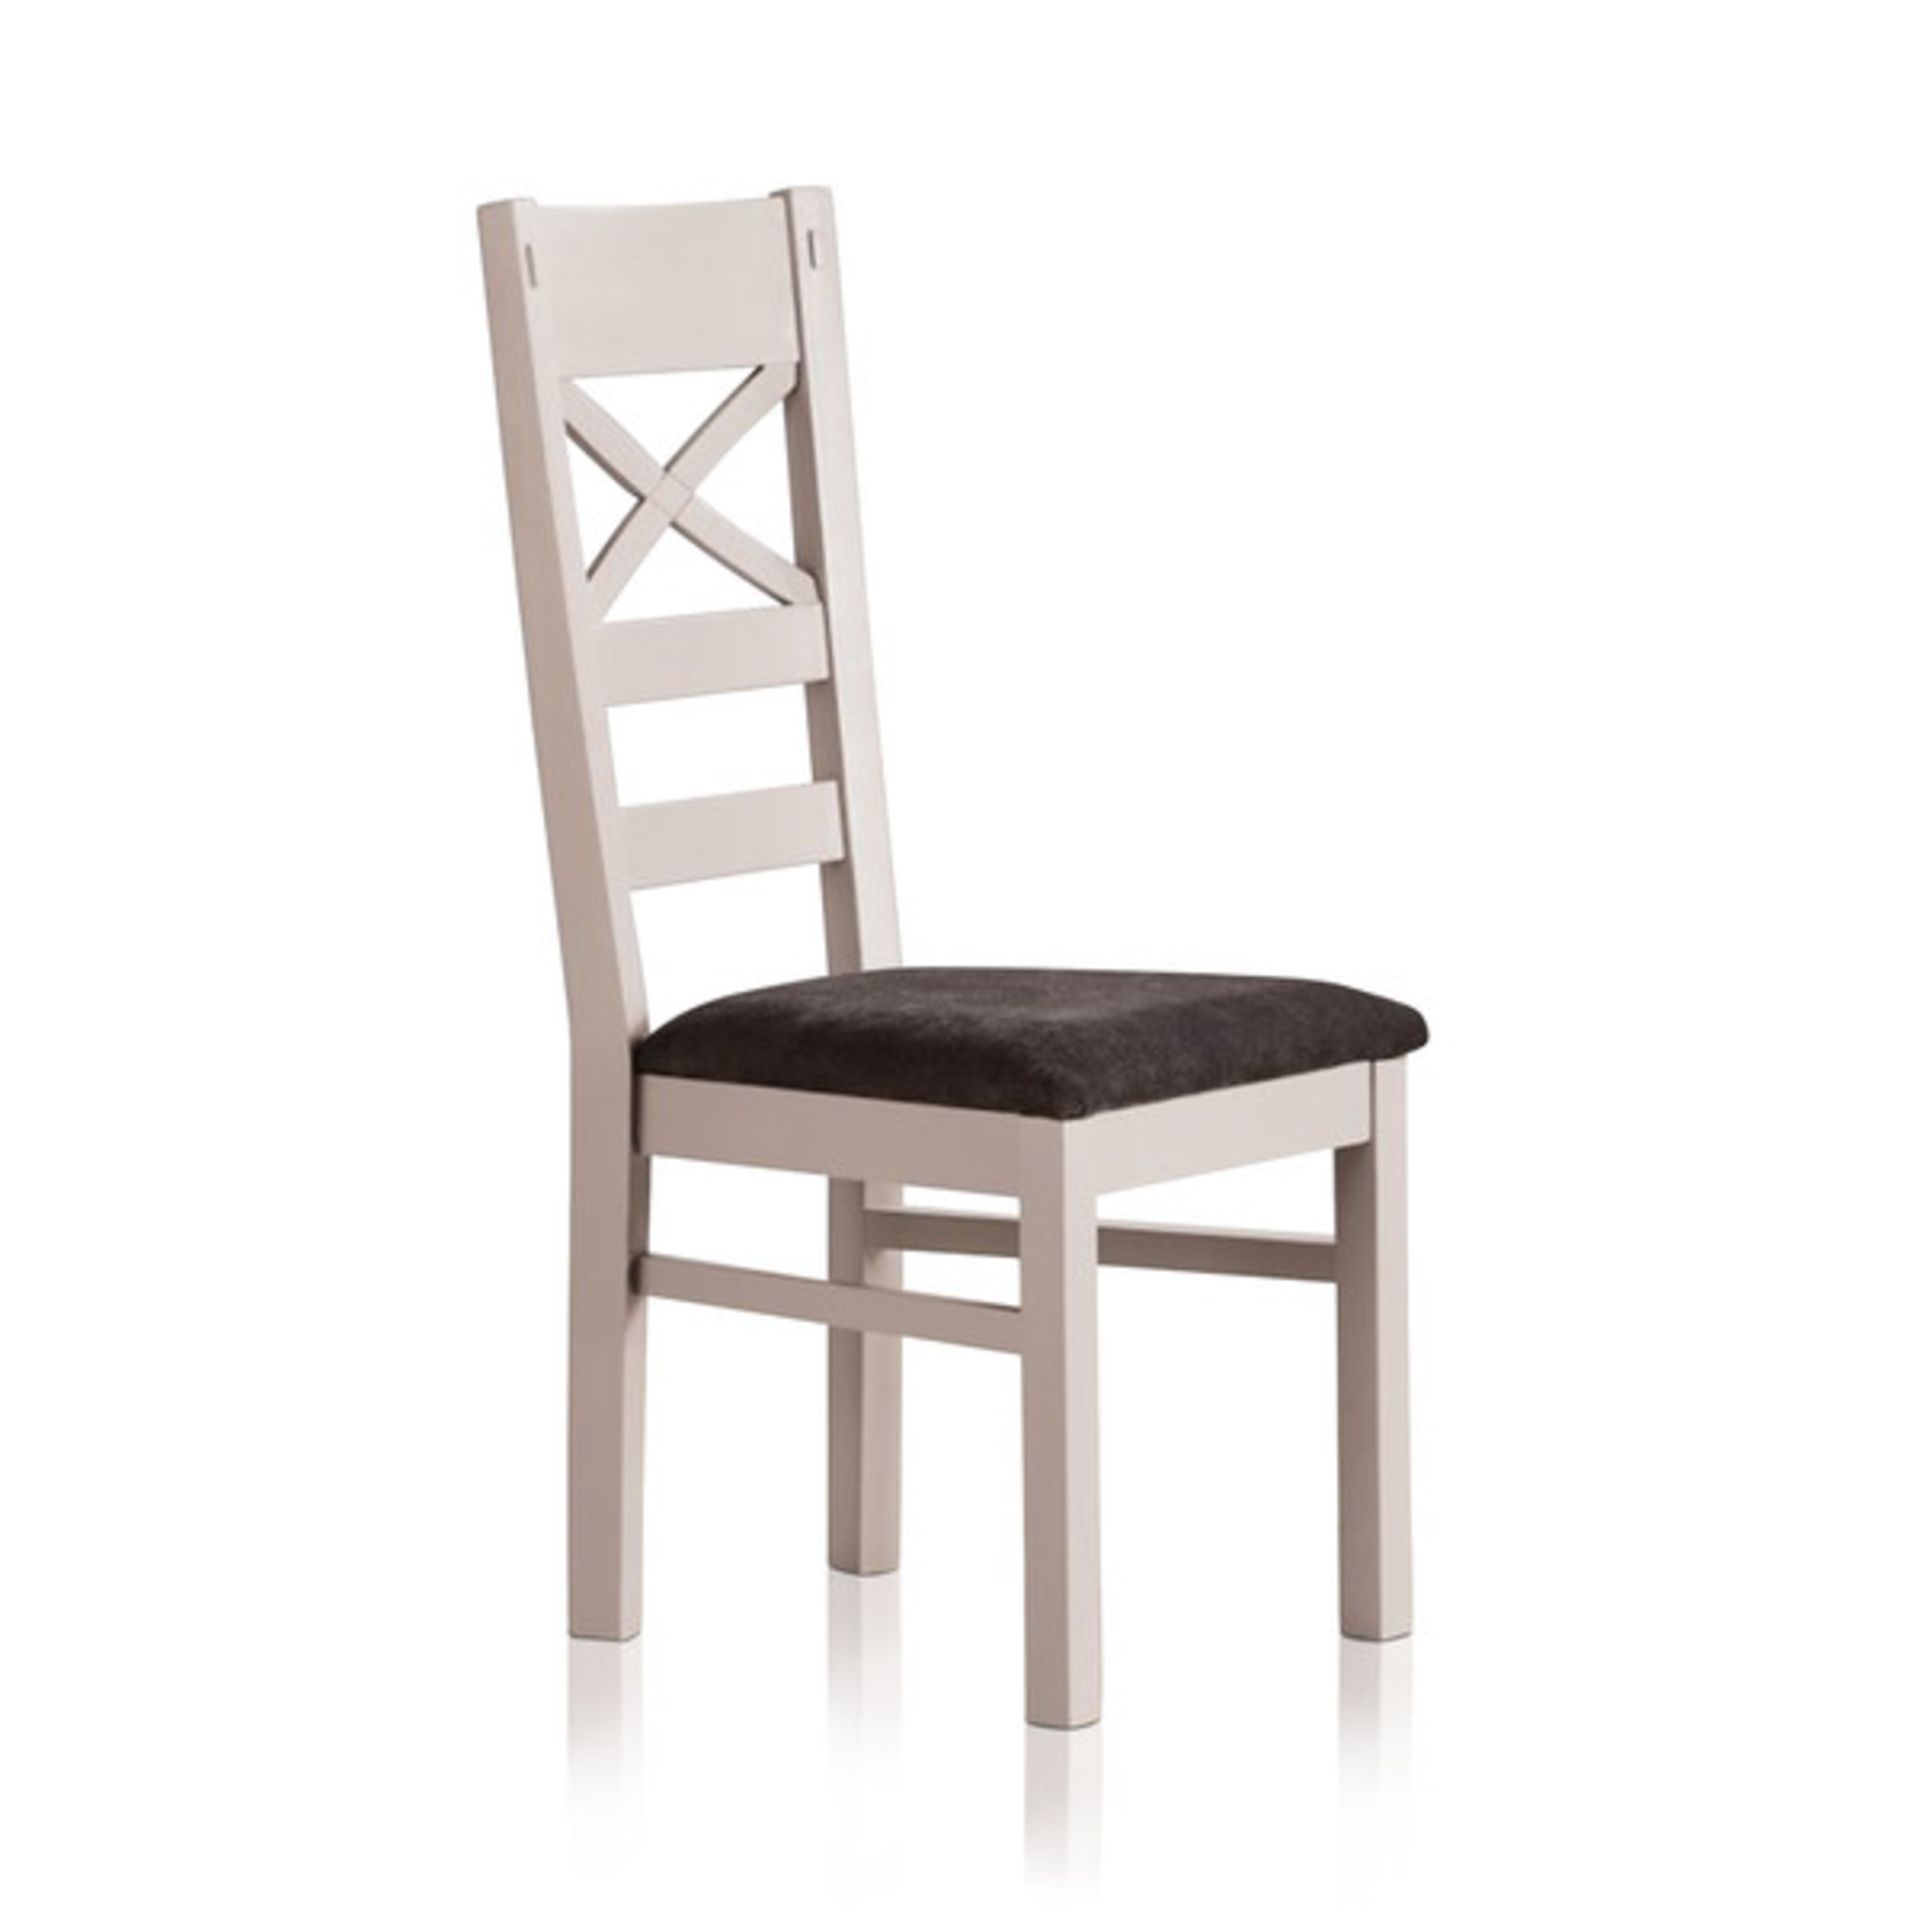 Oak Furnitureland Shay Painted Chair with Plain Charcoal Fabric Seat RRP 340.00About the Product(s) - Image 2 of 2